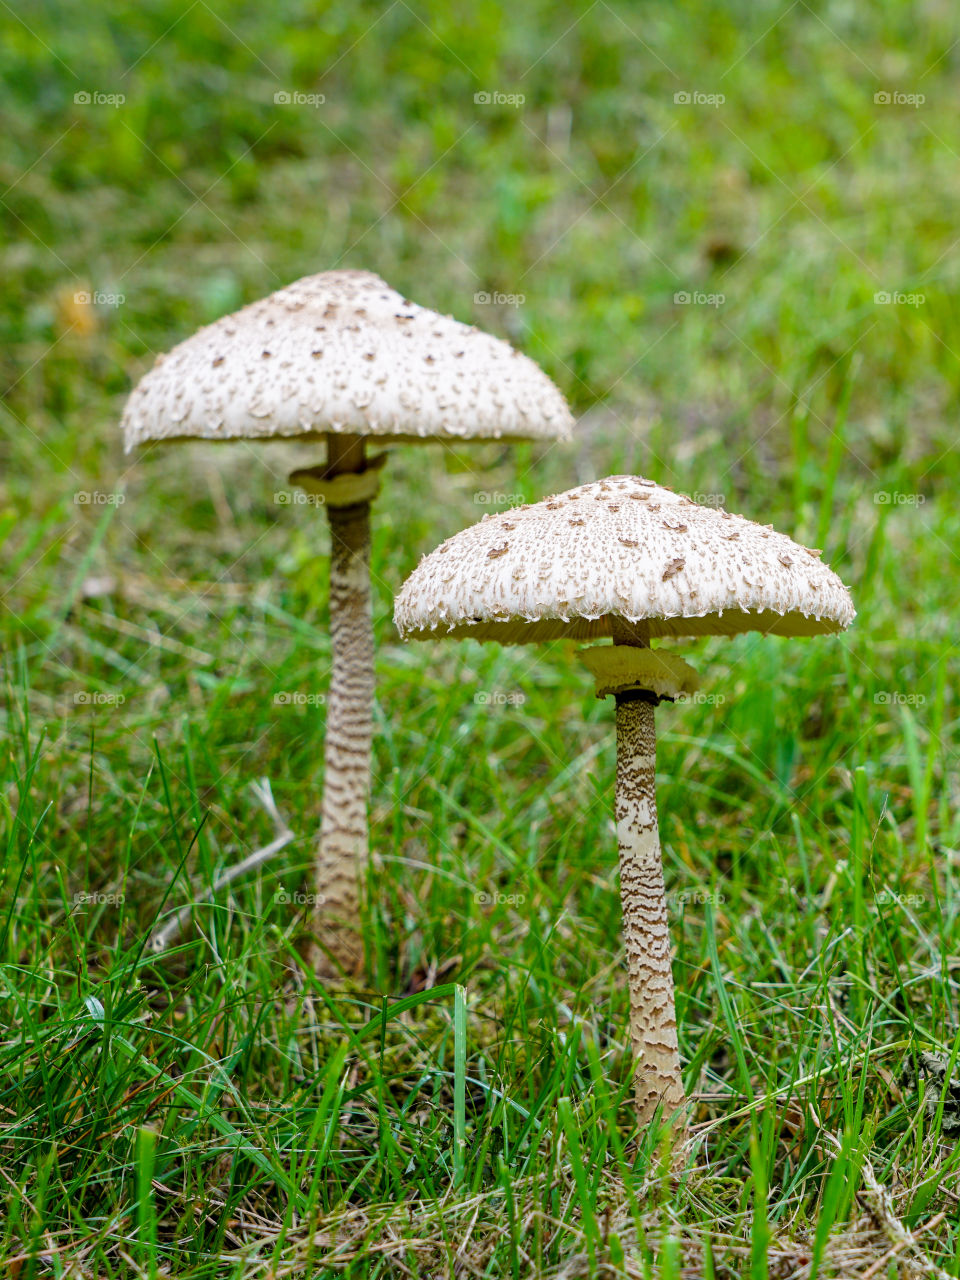 macrolepiota procera, the parasol mushroom with a large, prominent fruiting body resembling a parasol